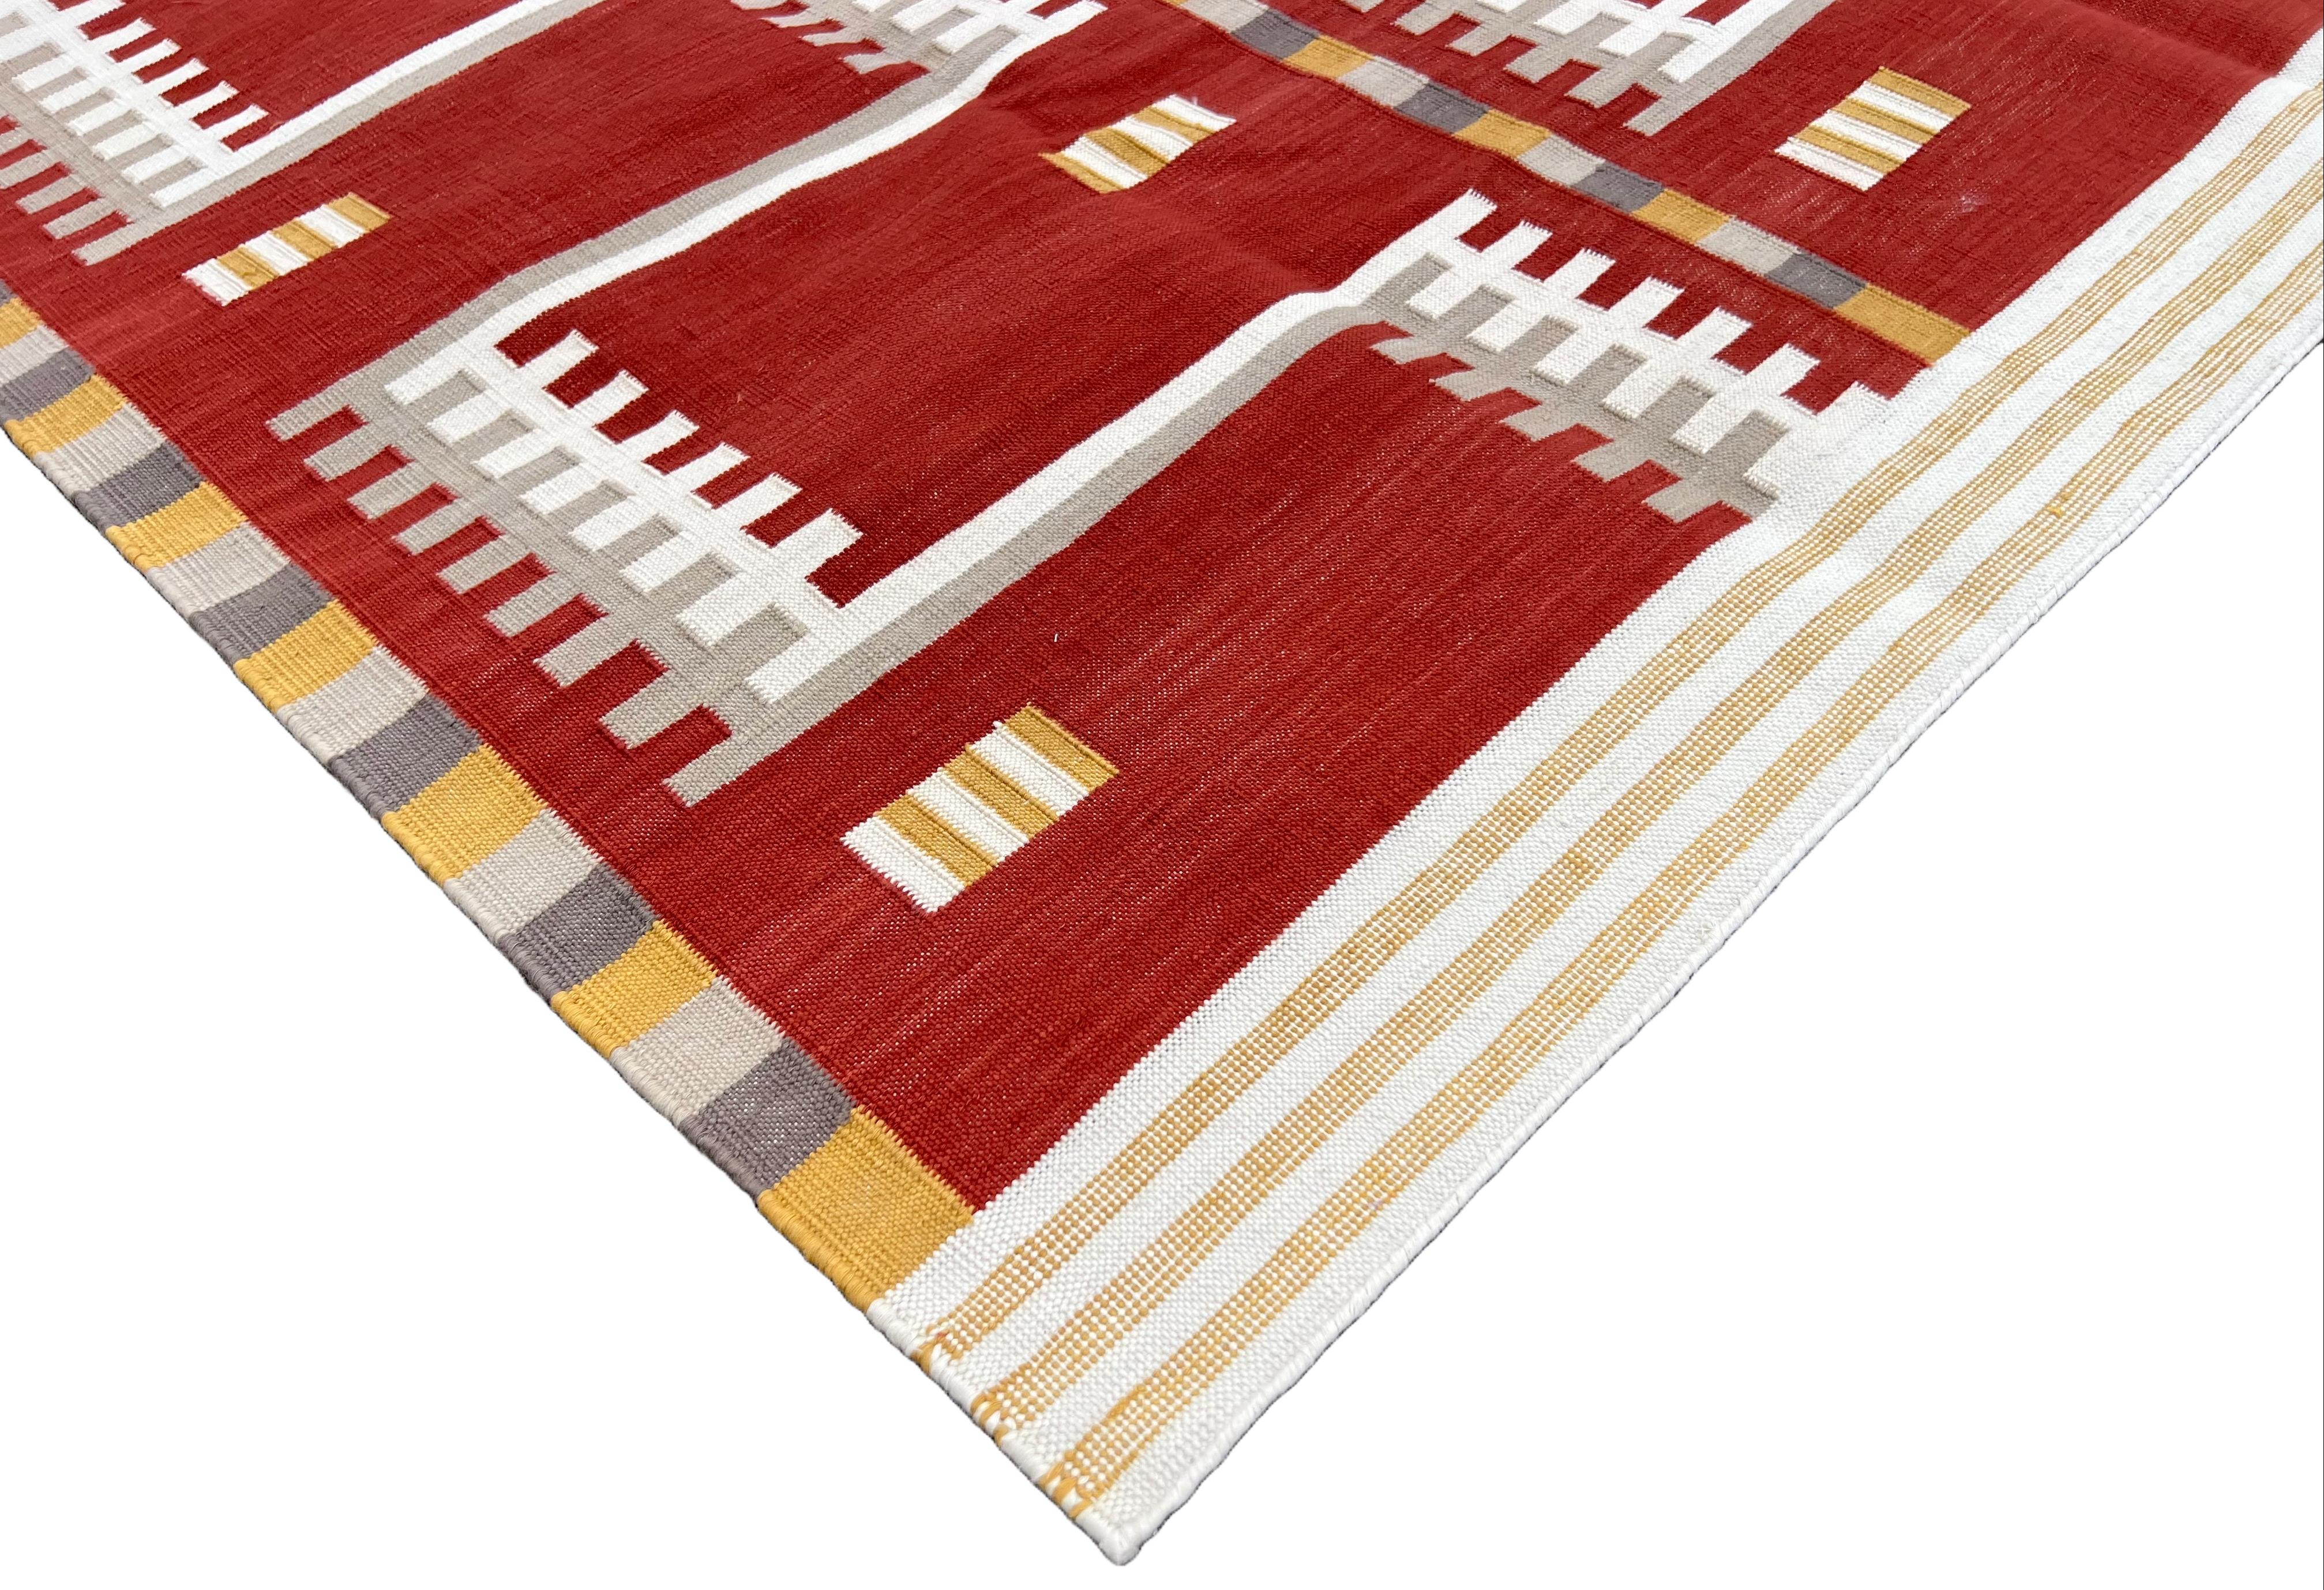 Hand-Woven Handmade Cotton Area Flat Weave Rug, Red, Cream & Beige Geometric Indian Dhurrie For Sale